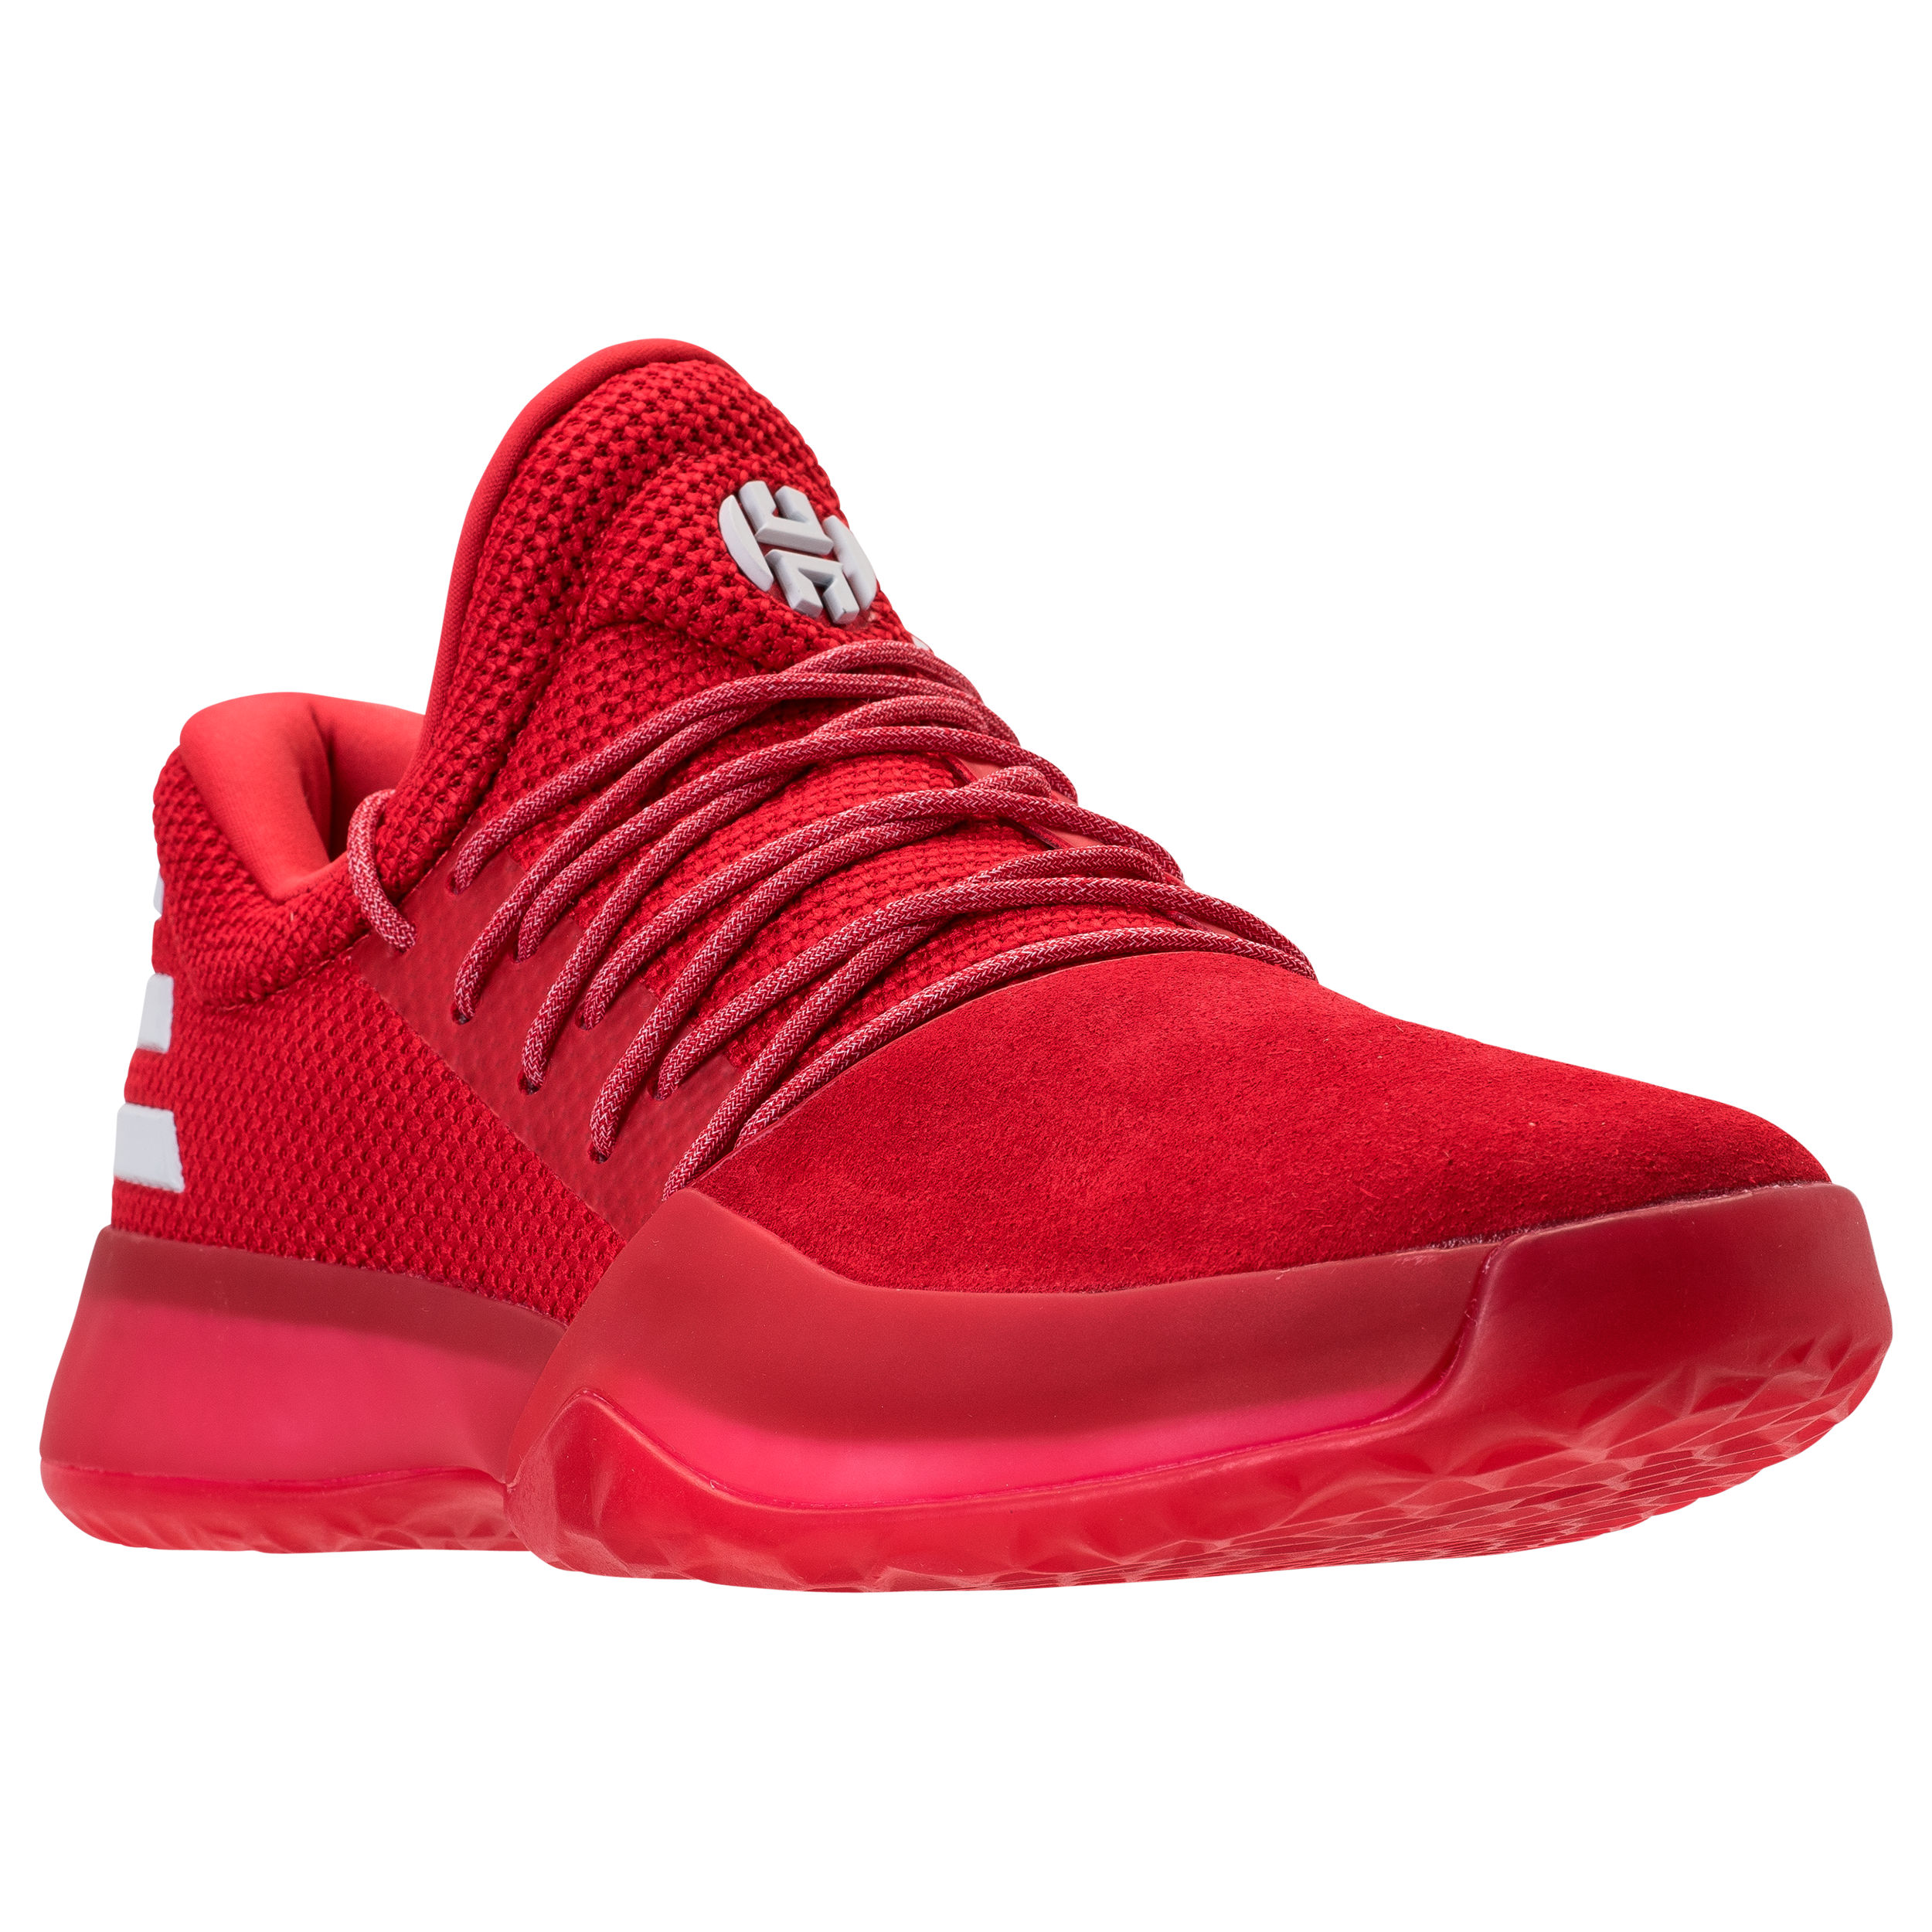 adidas-Harden-Vol-1-Team-Colors-Red-1 